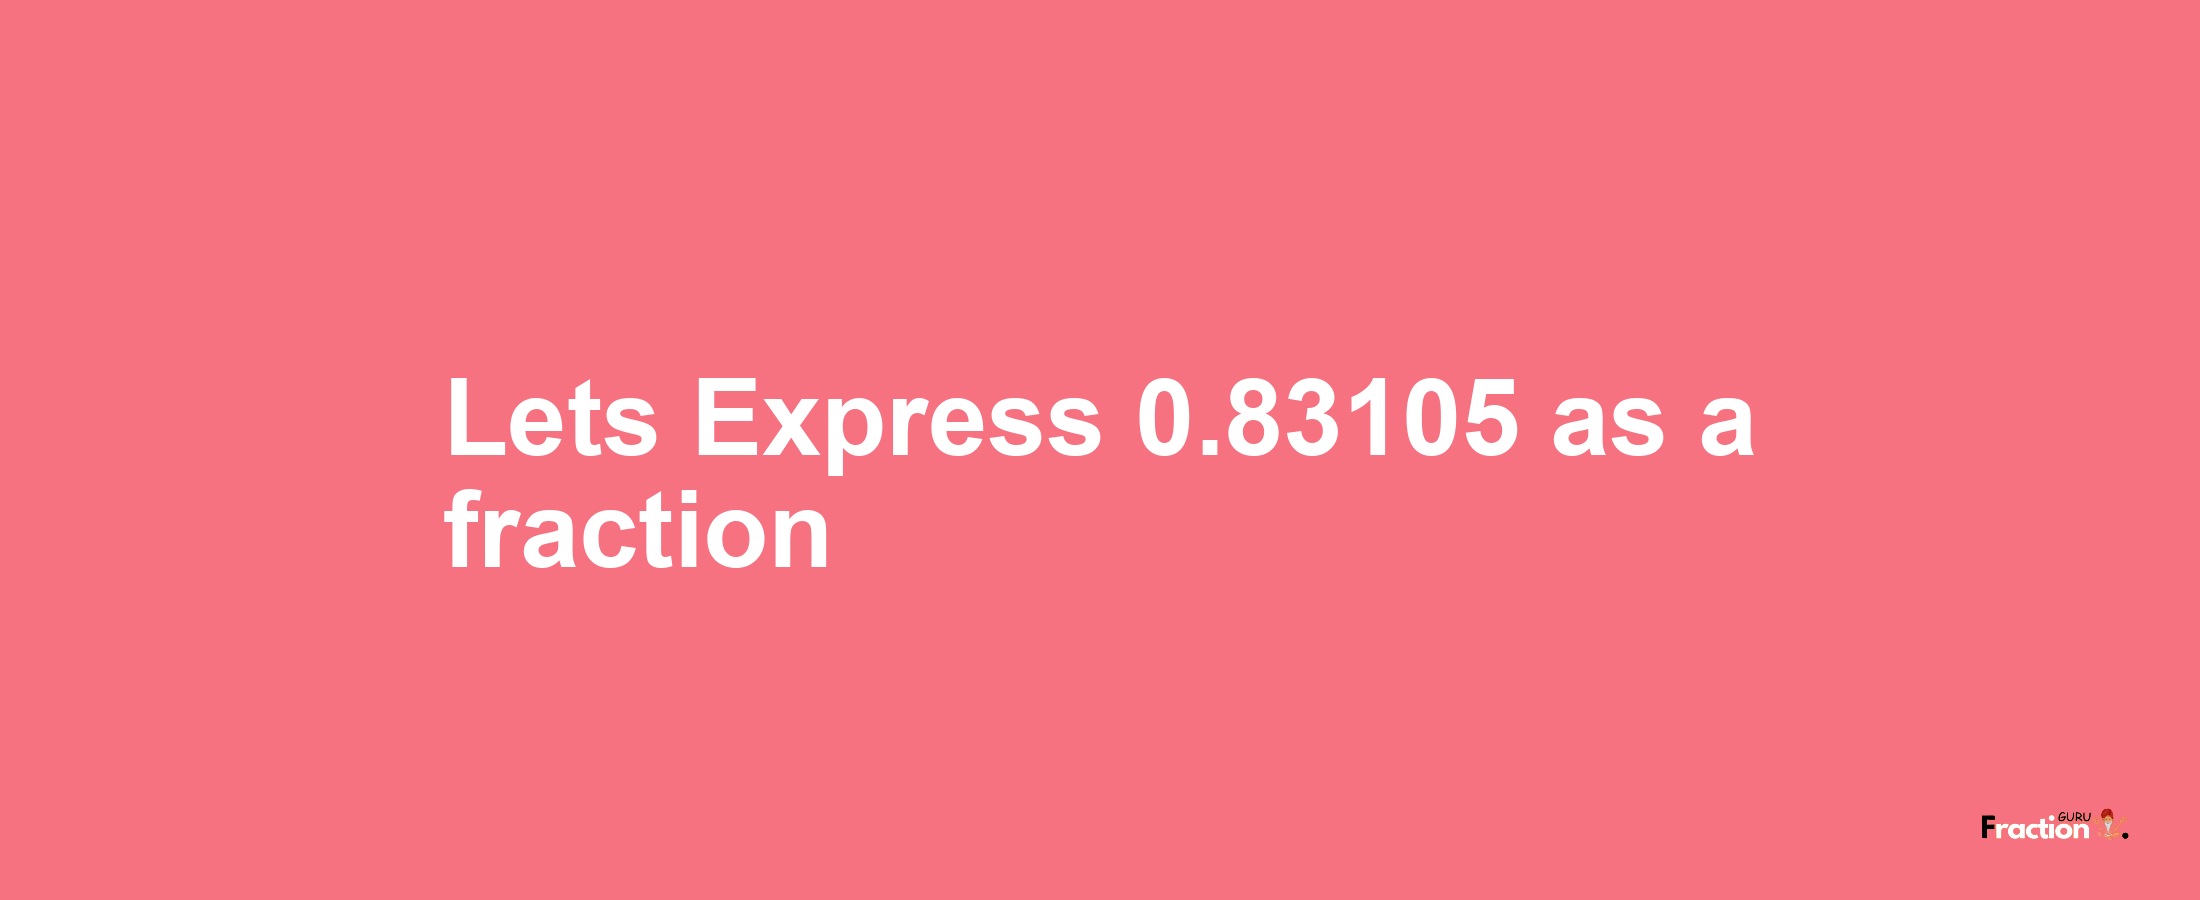 Lets Express 0.83105 as afraction